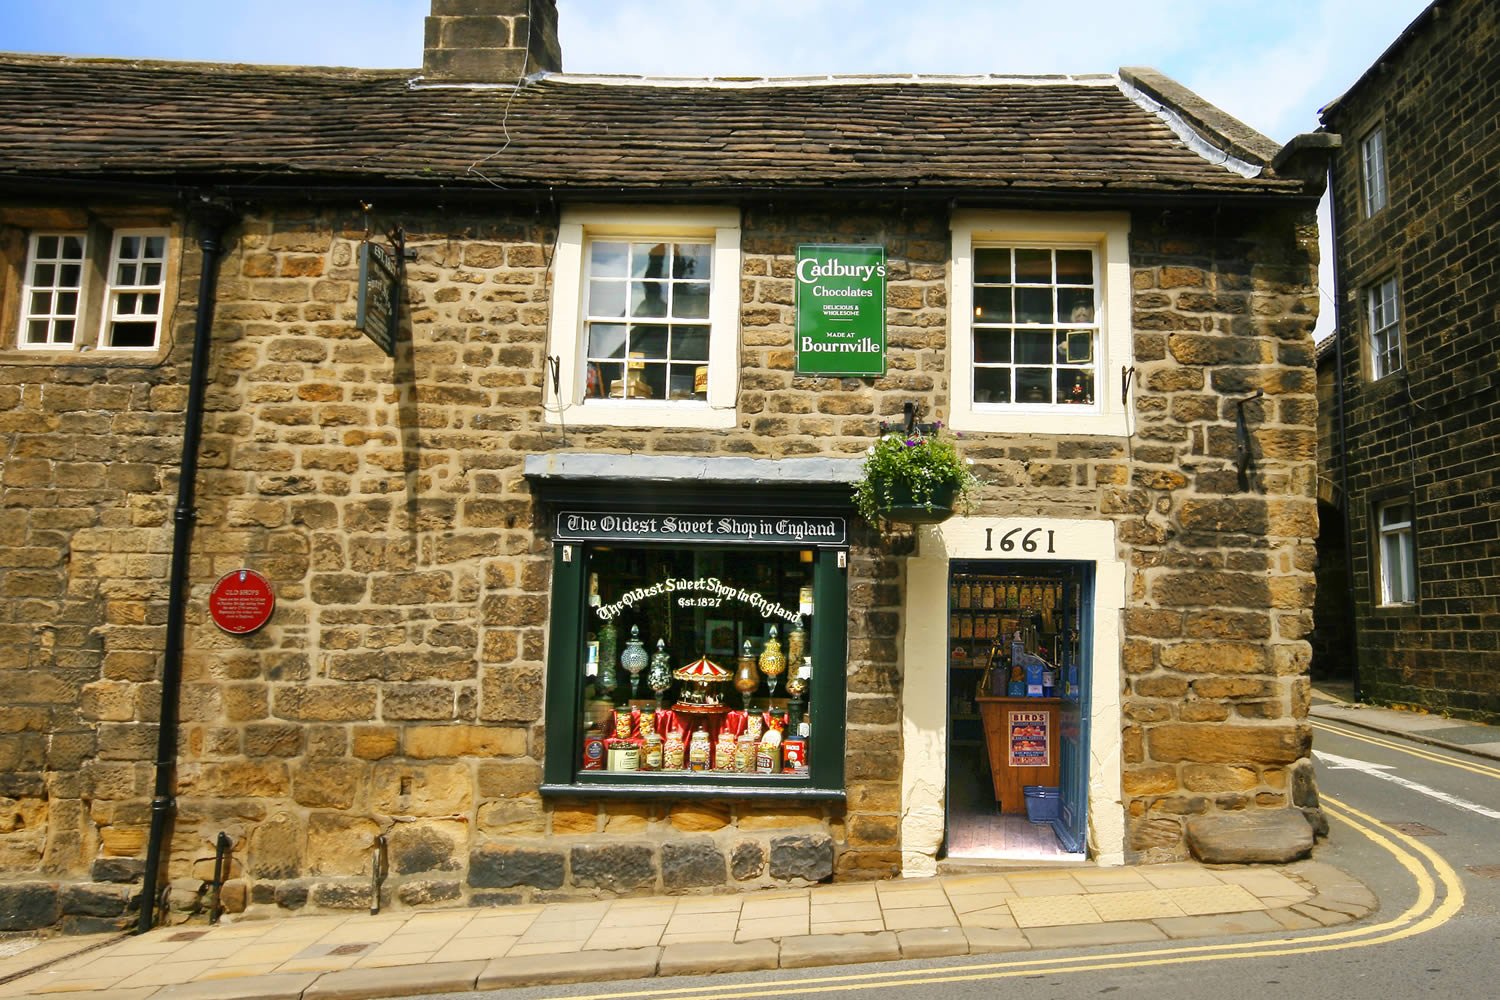 Image name The Oldest Sweet Shop in the World the 3 image from the post The Oldest Sweet Shop in the World in Yorkshire.com.